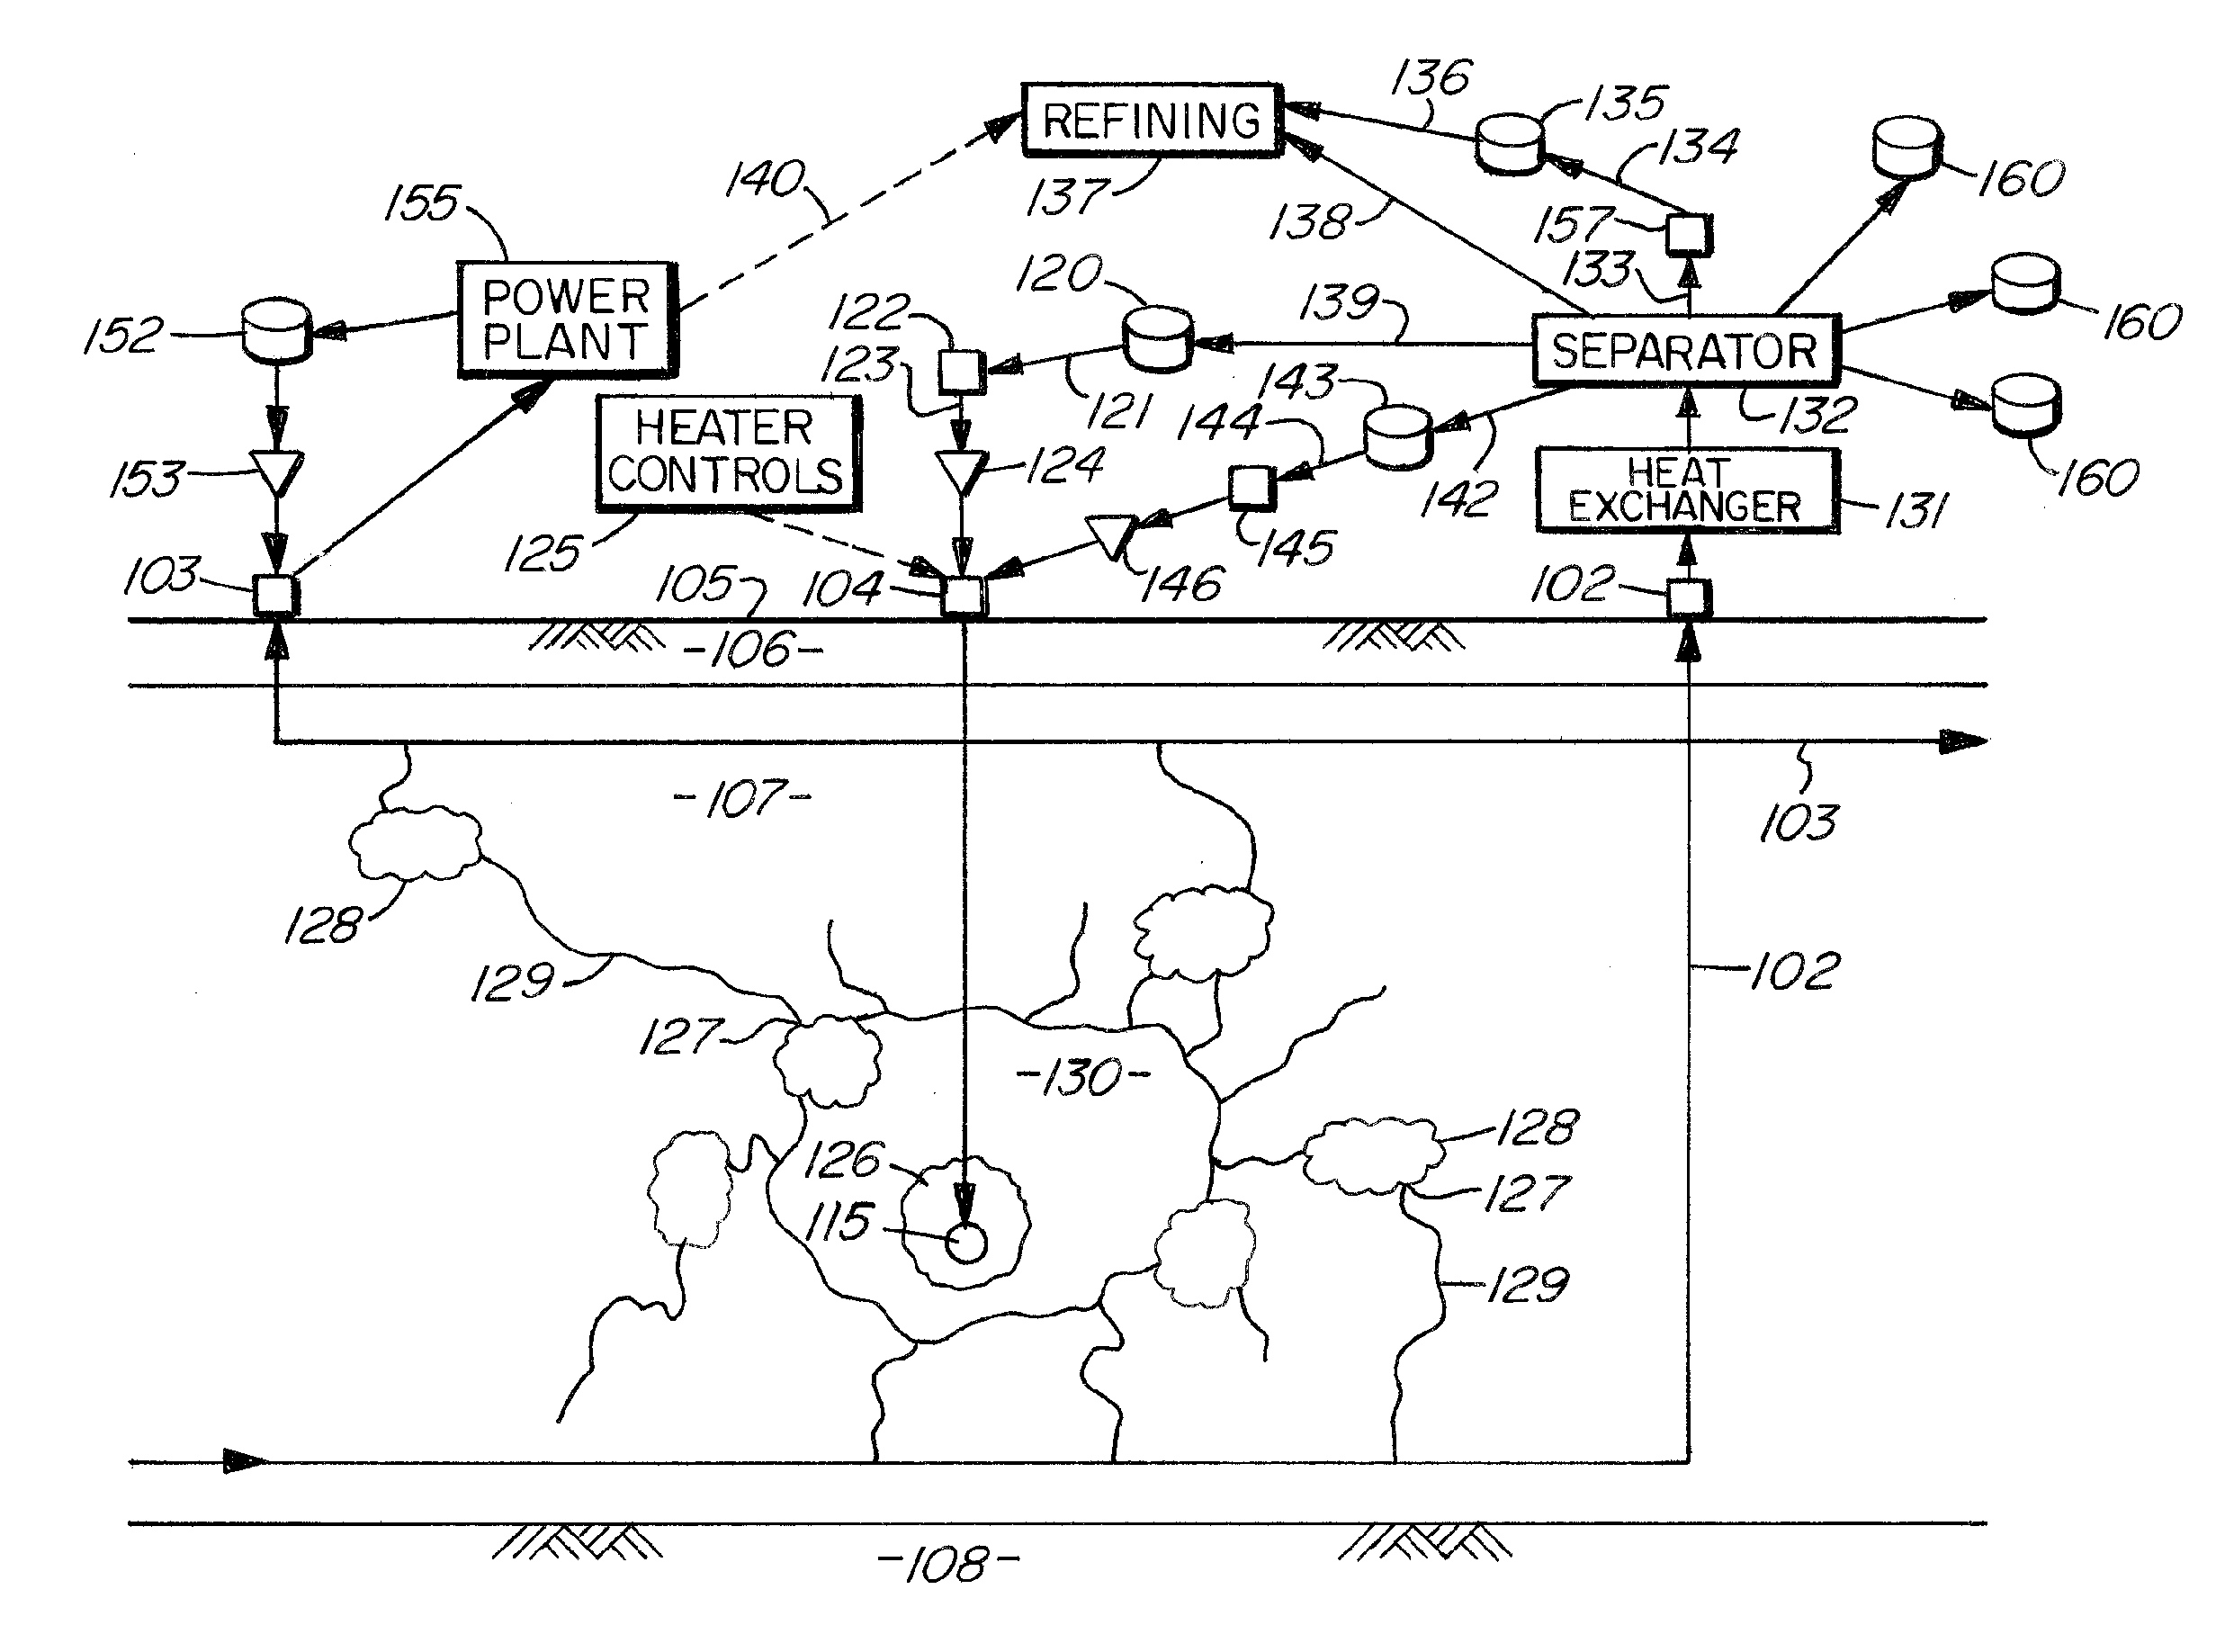 Method of recovering hydrocarbons from carbonate and shale formations